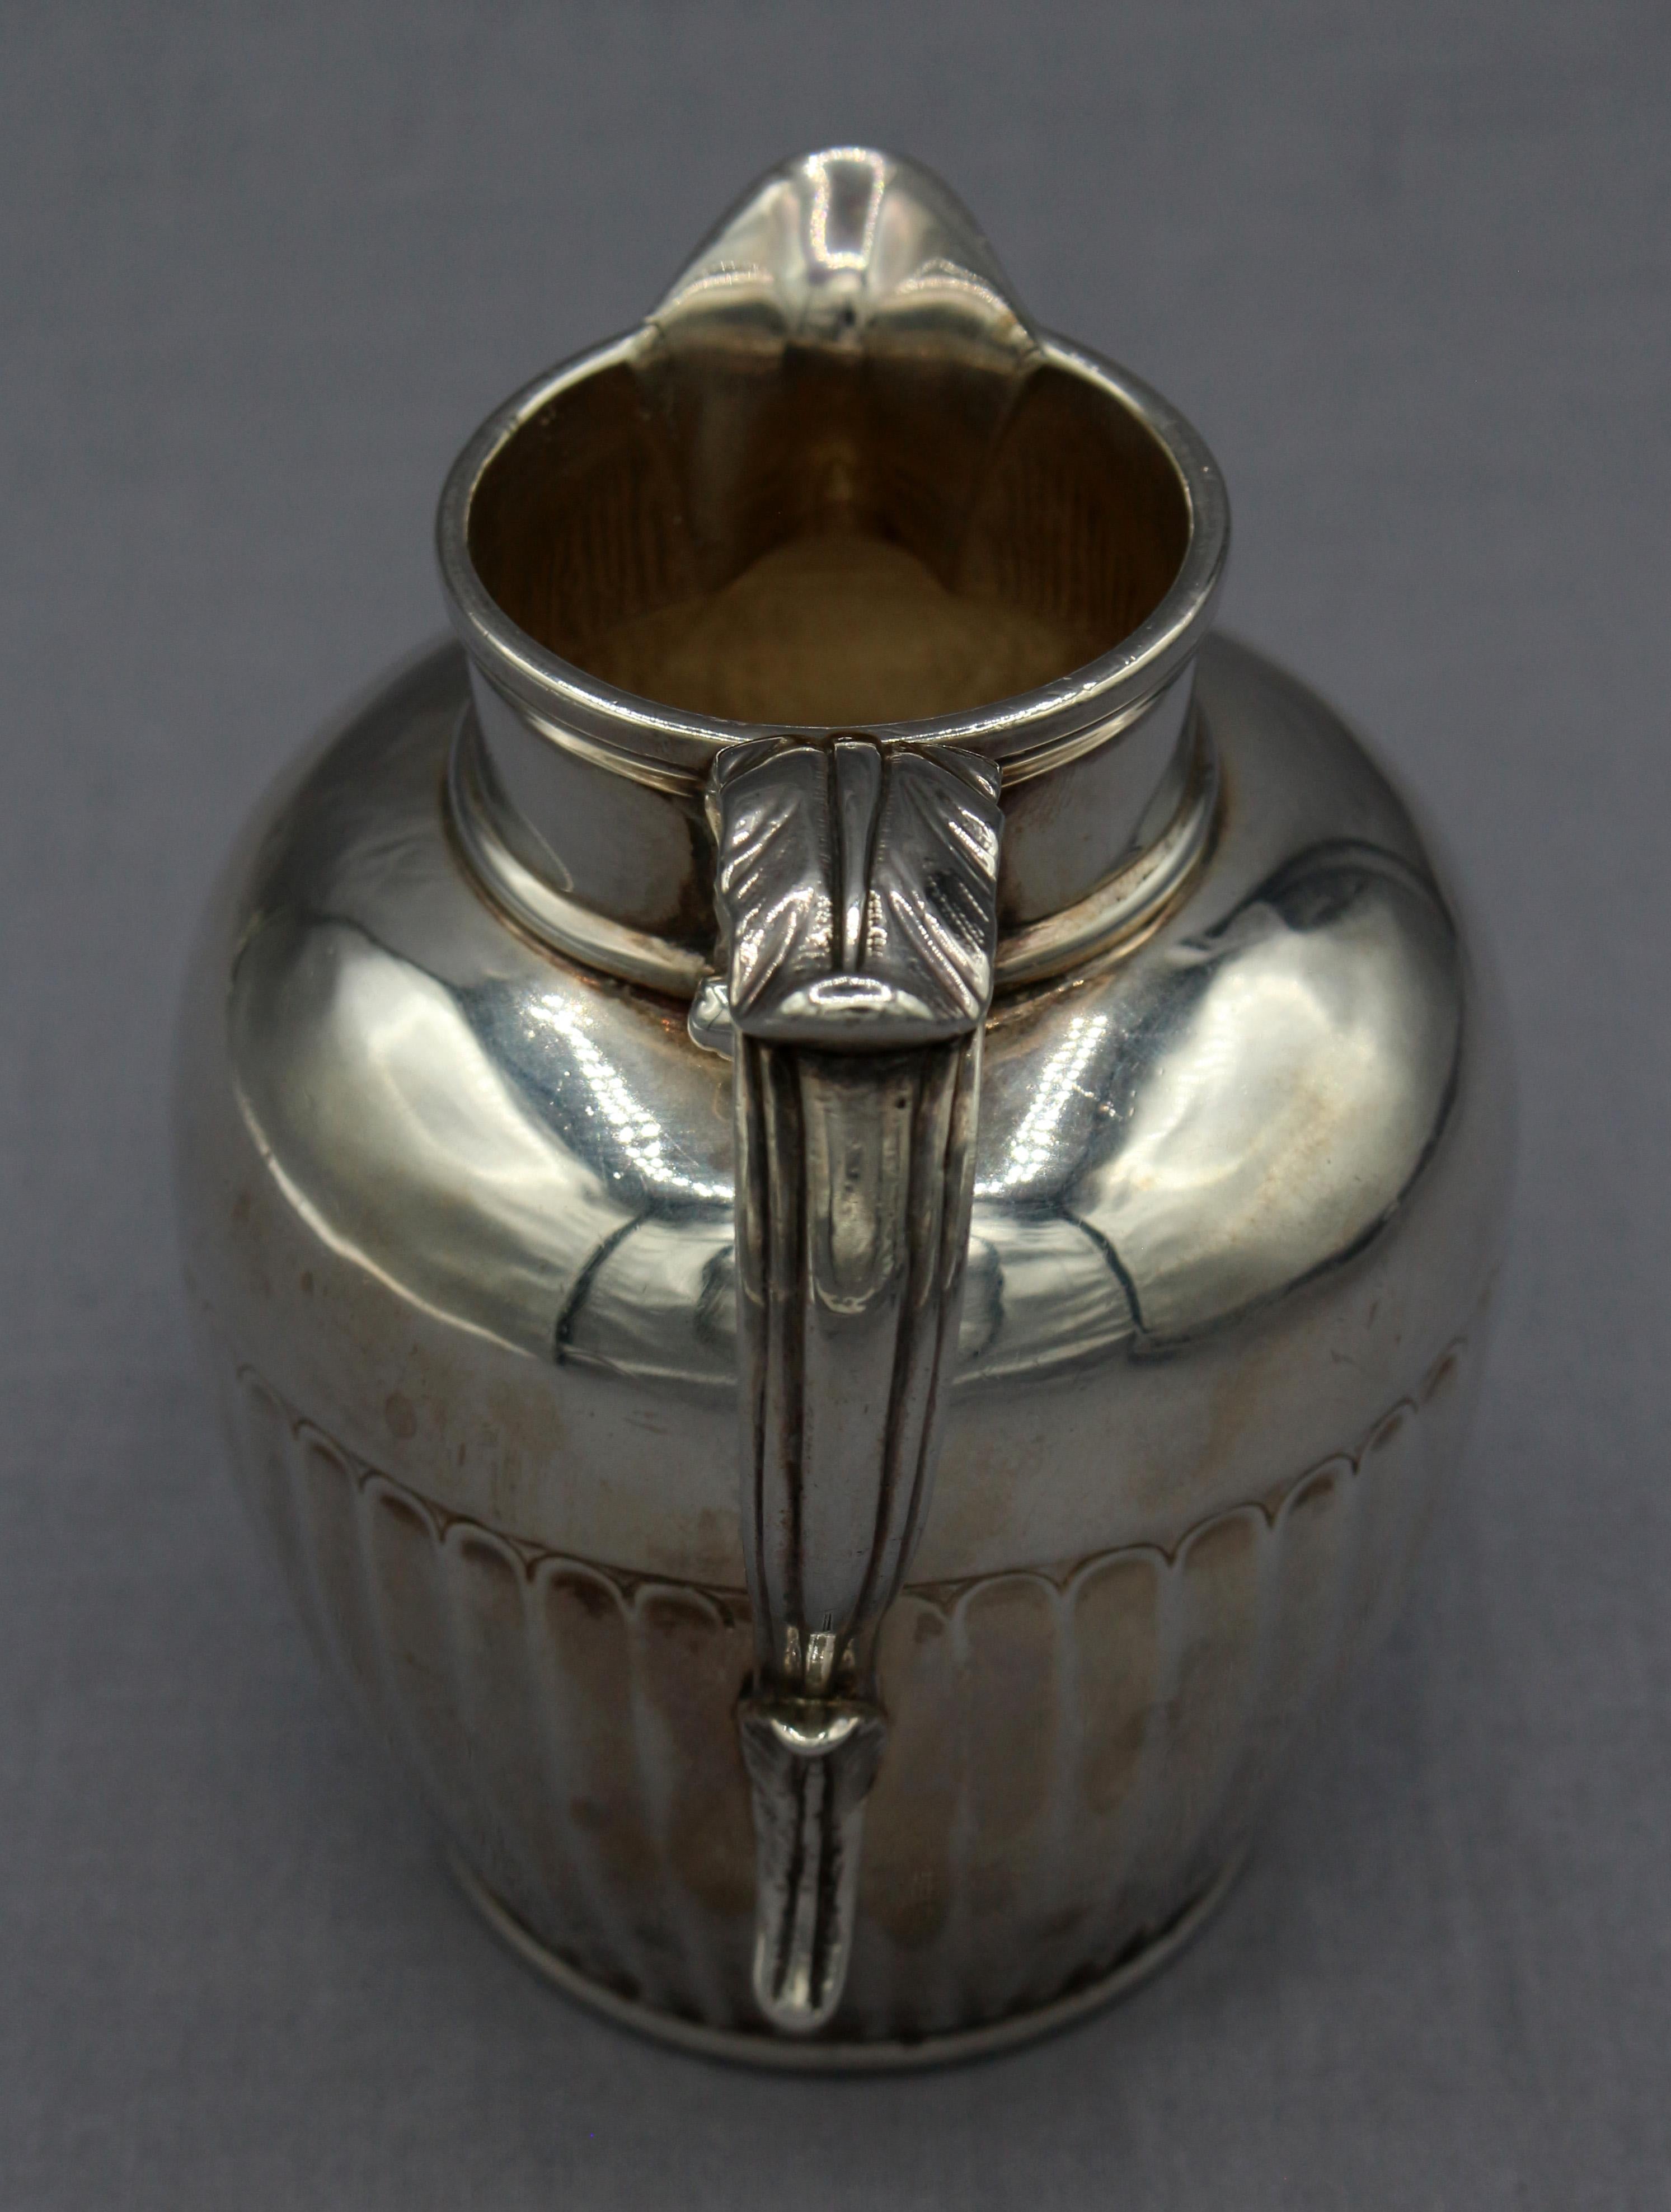 Sterling silver cream jug by Hester Bateman, 1793, London. Handsome with fluted body & acanthus leaf scrolled handle. Here we see the family mark (Hester & Son) for date used on their classic jug form (it appears as late as 1812). Cursive script HB